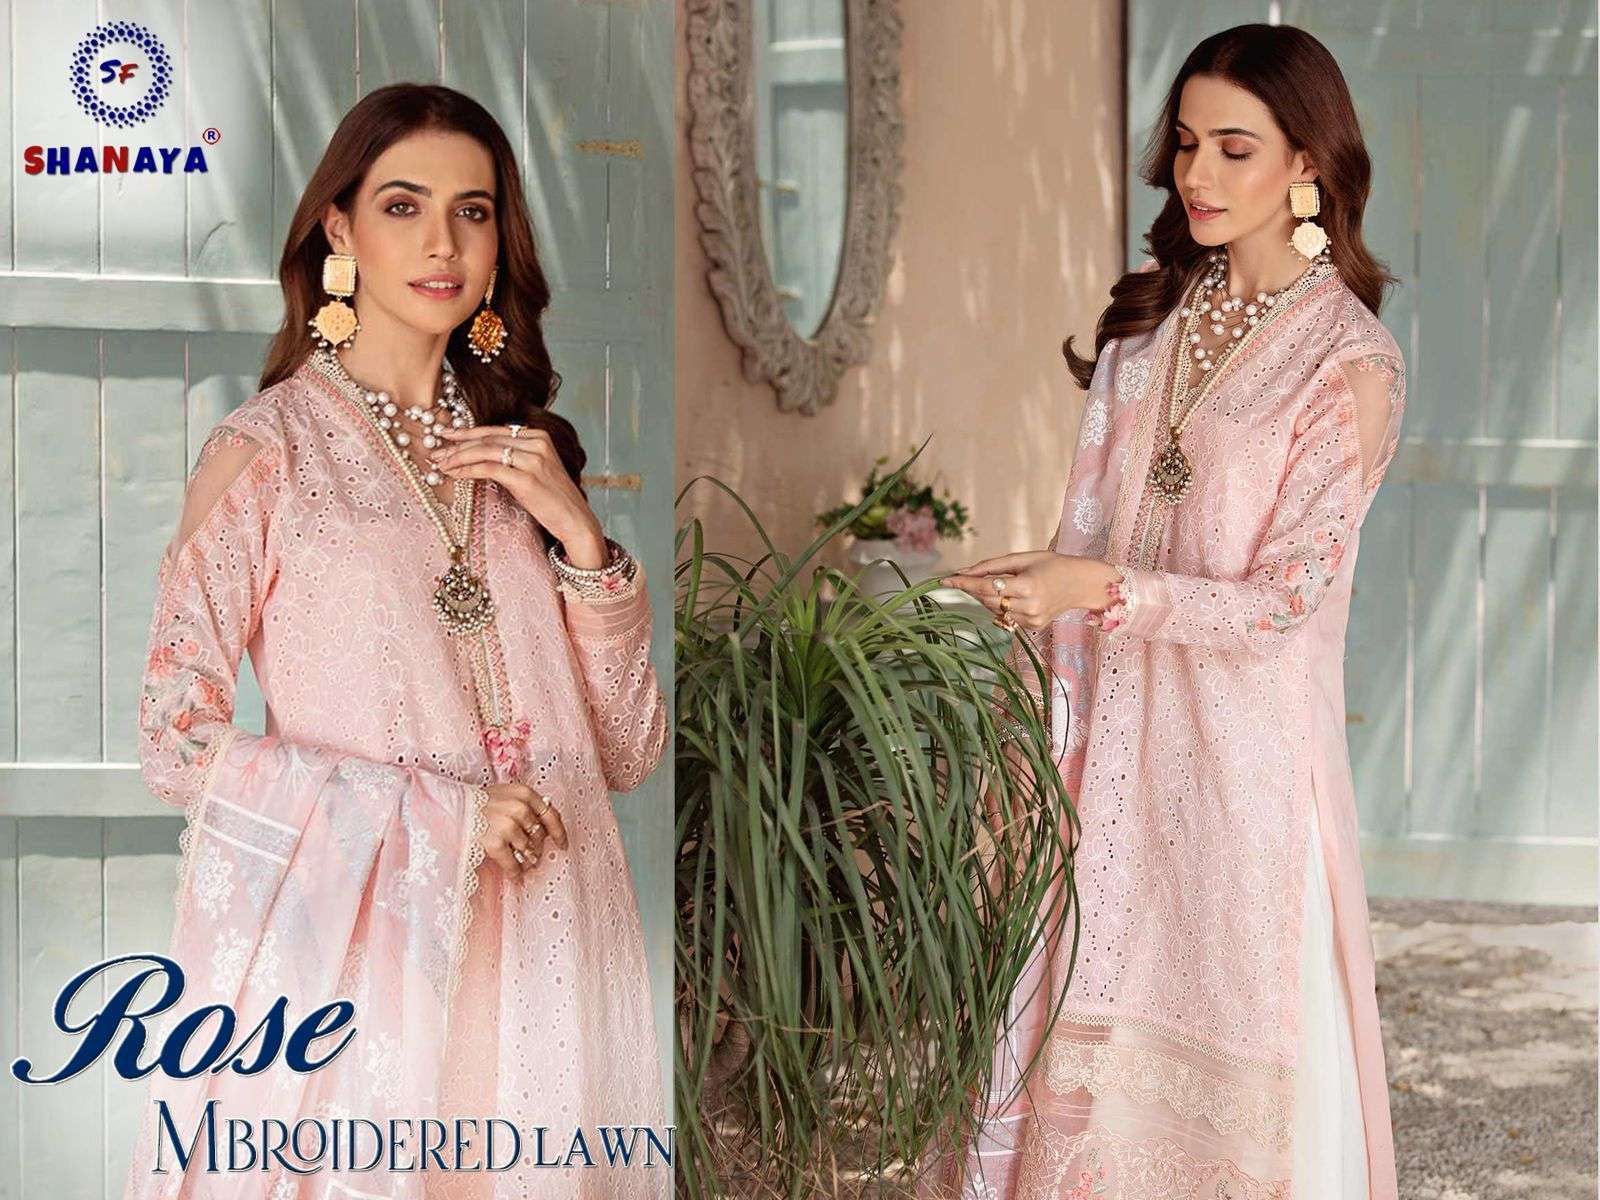 shanaya rose mbroidered lawn series 02-04 cambric cotton suit 